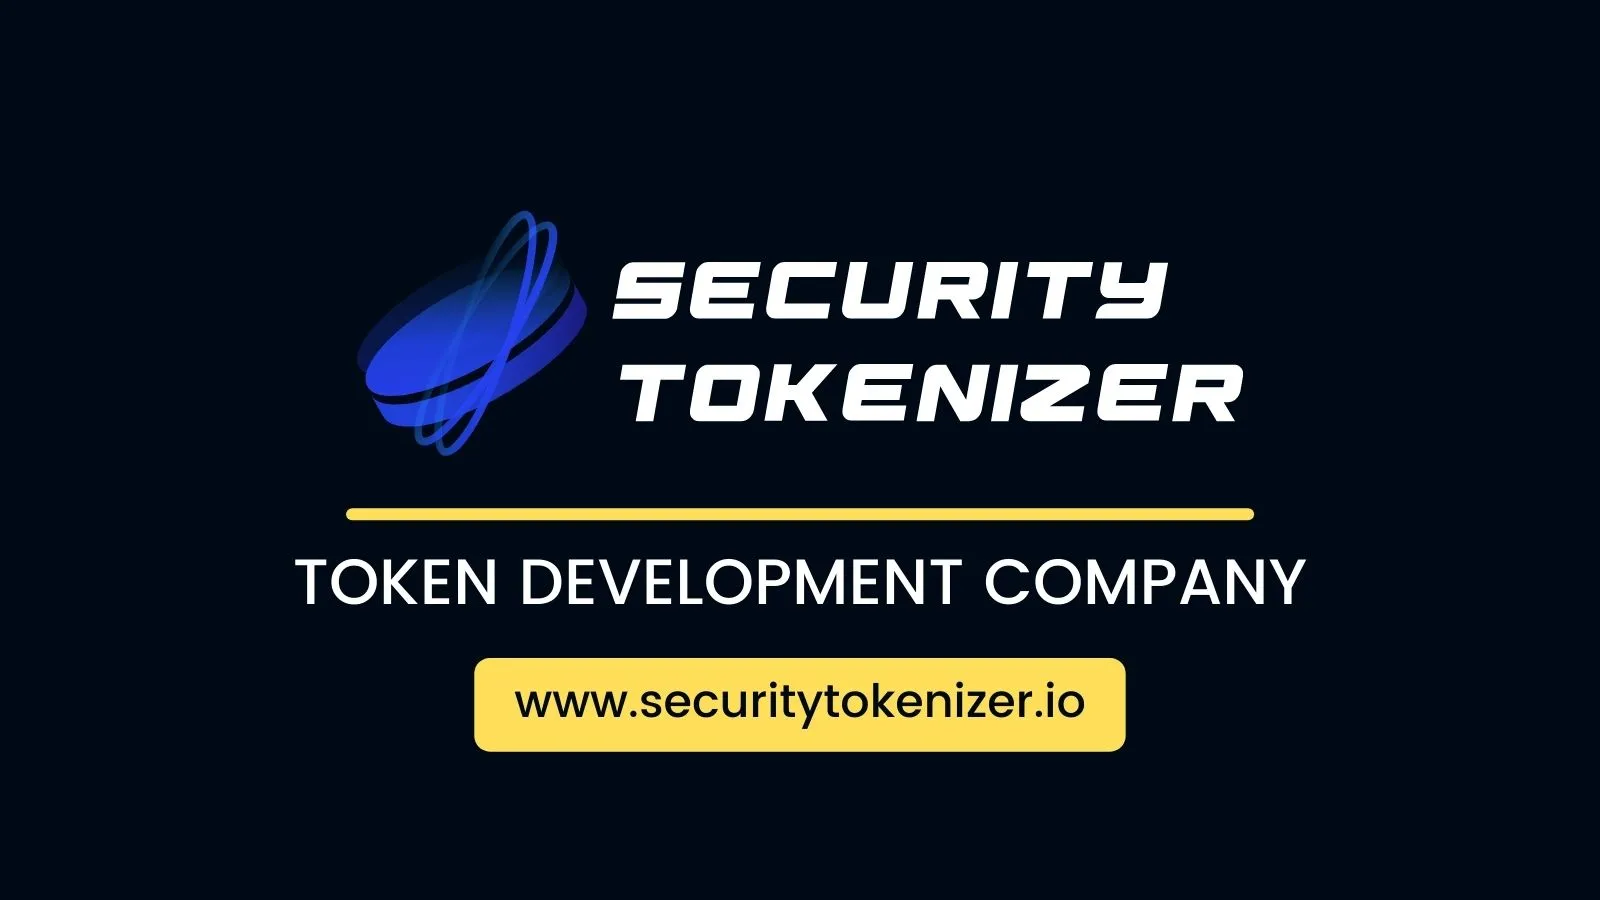 Security Tokenizer - Extensive Token Development Services and Solution